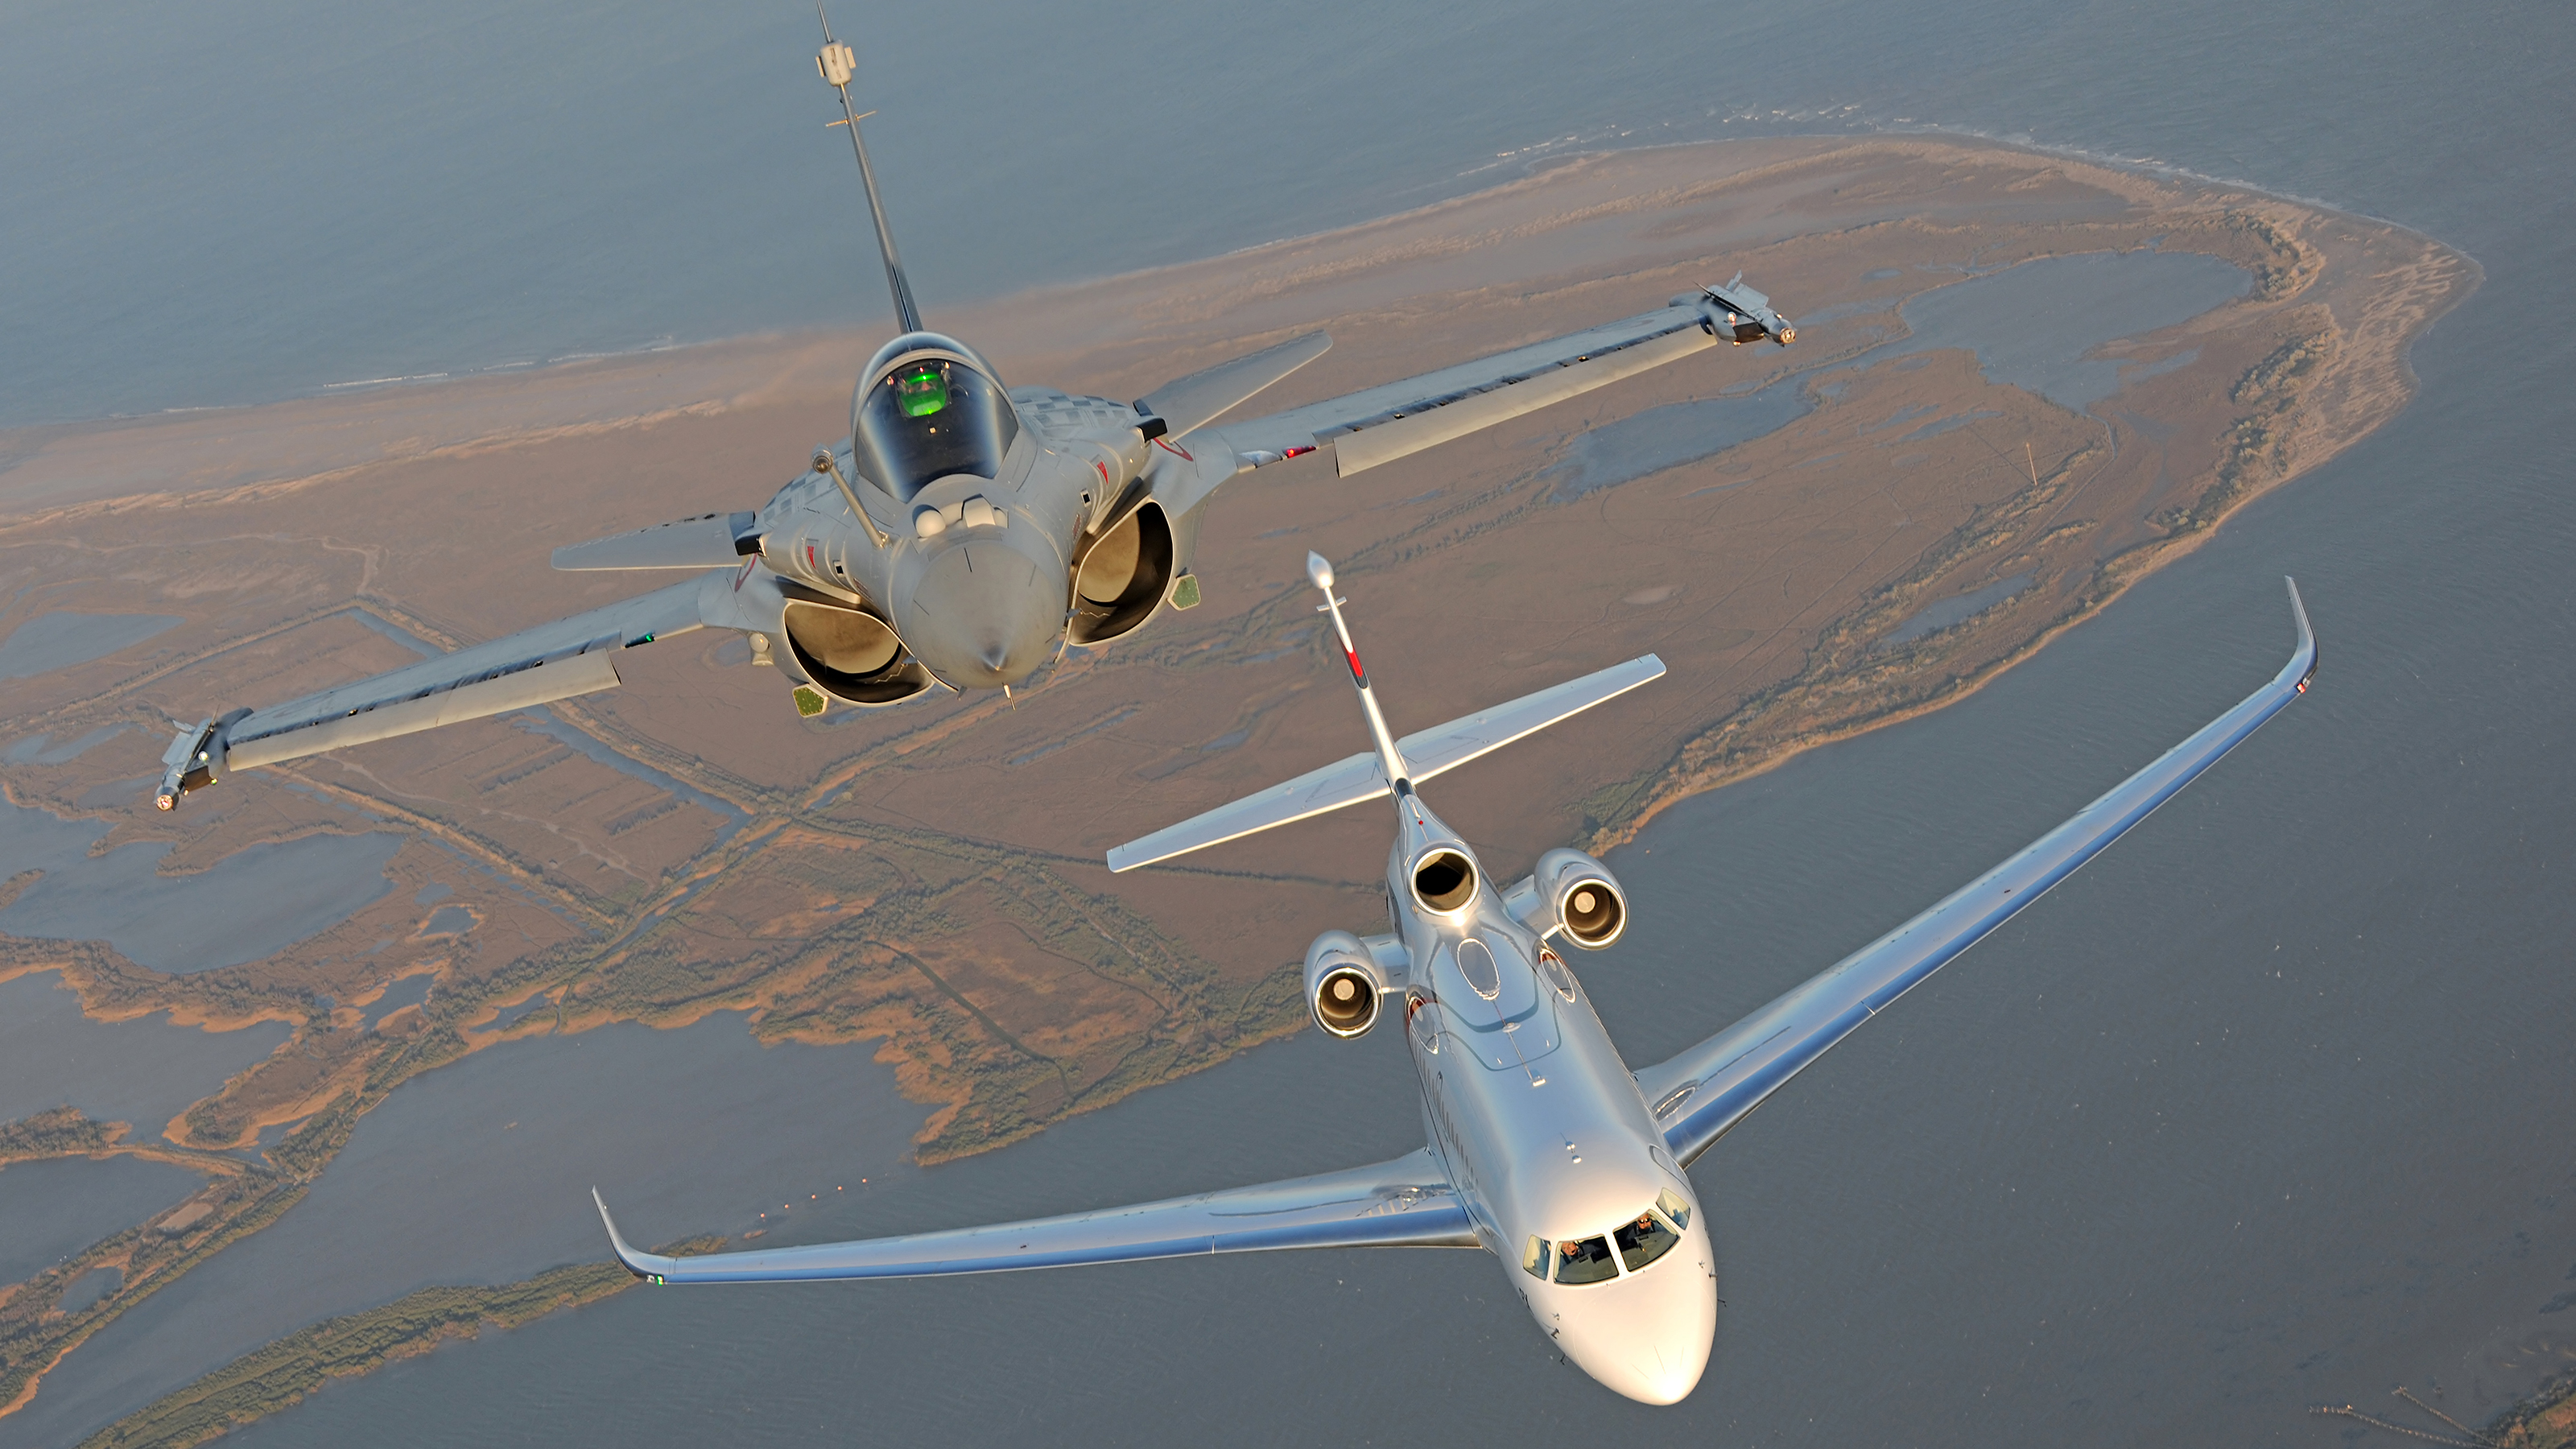 Dassault captures its Rafale fighter and Falcon 8X together during a formation flight. Photo courtesy of Dassault.